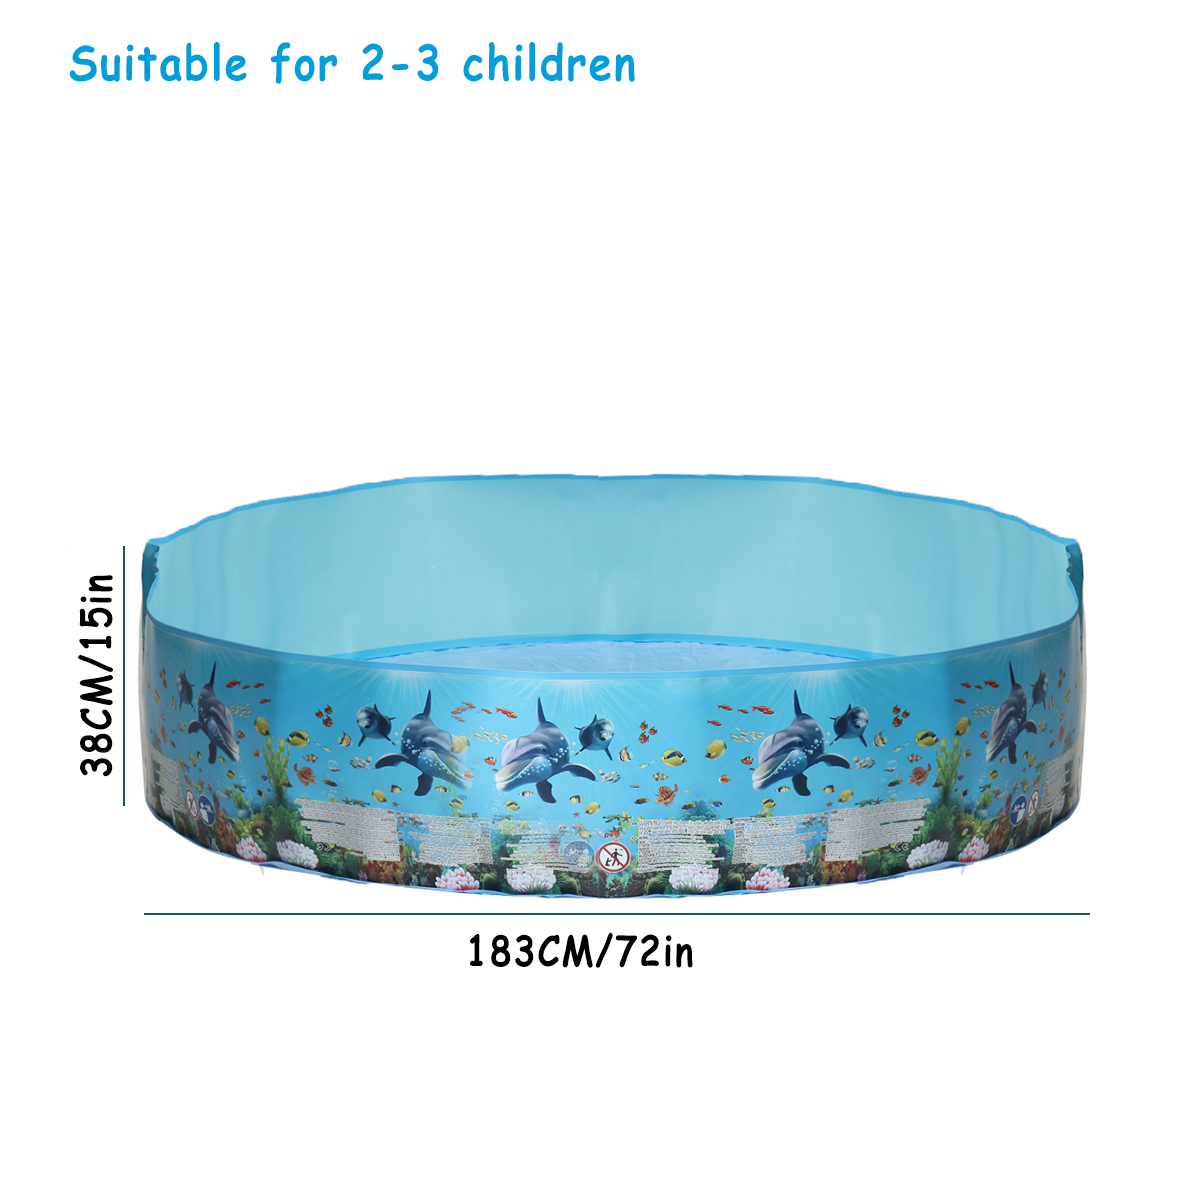 183244cm-Round-Swimming-Pool-Home-Use-Garden-Paddling-Pool-Non-inflatable-Children-Bathing-Tub-Kids--1715065-11